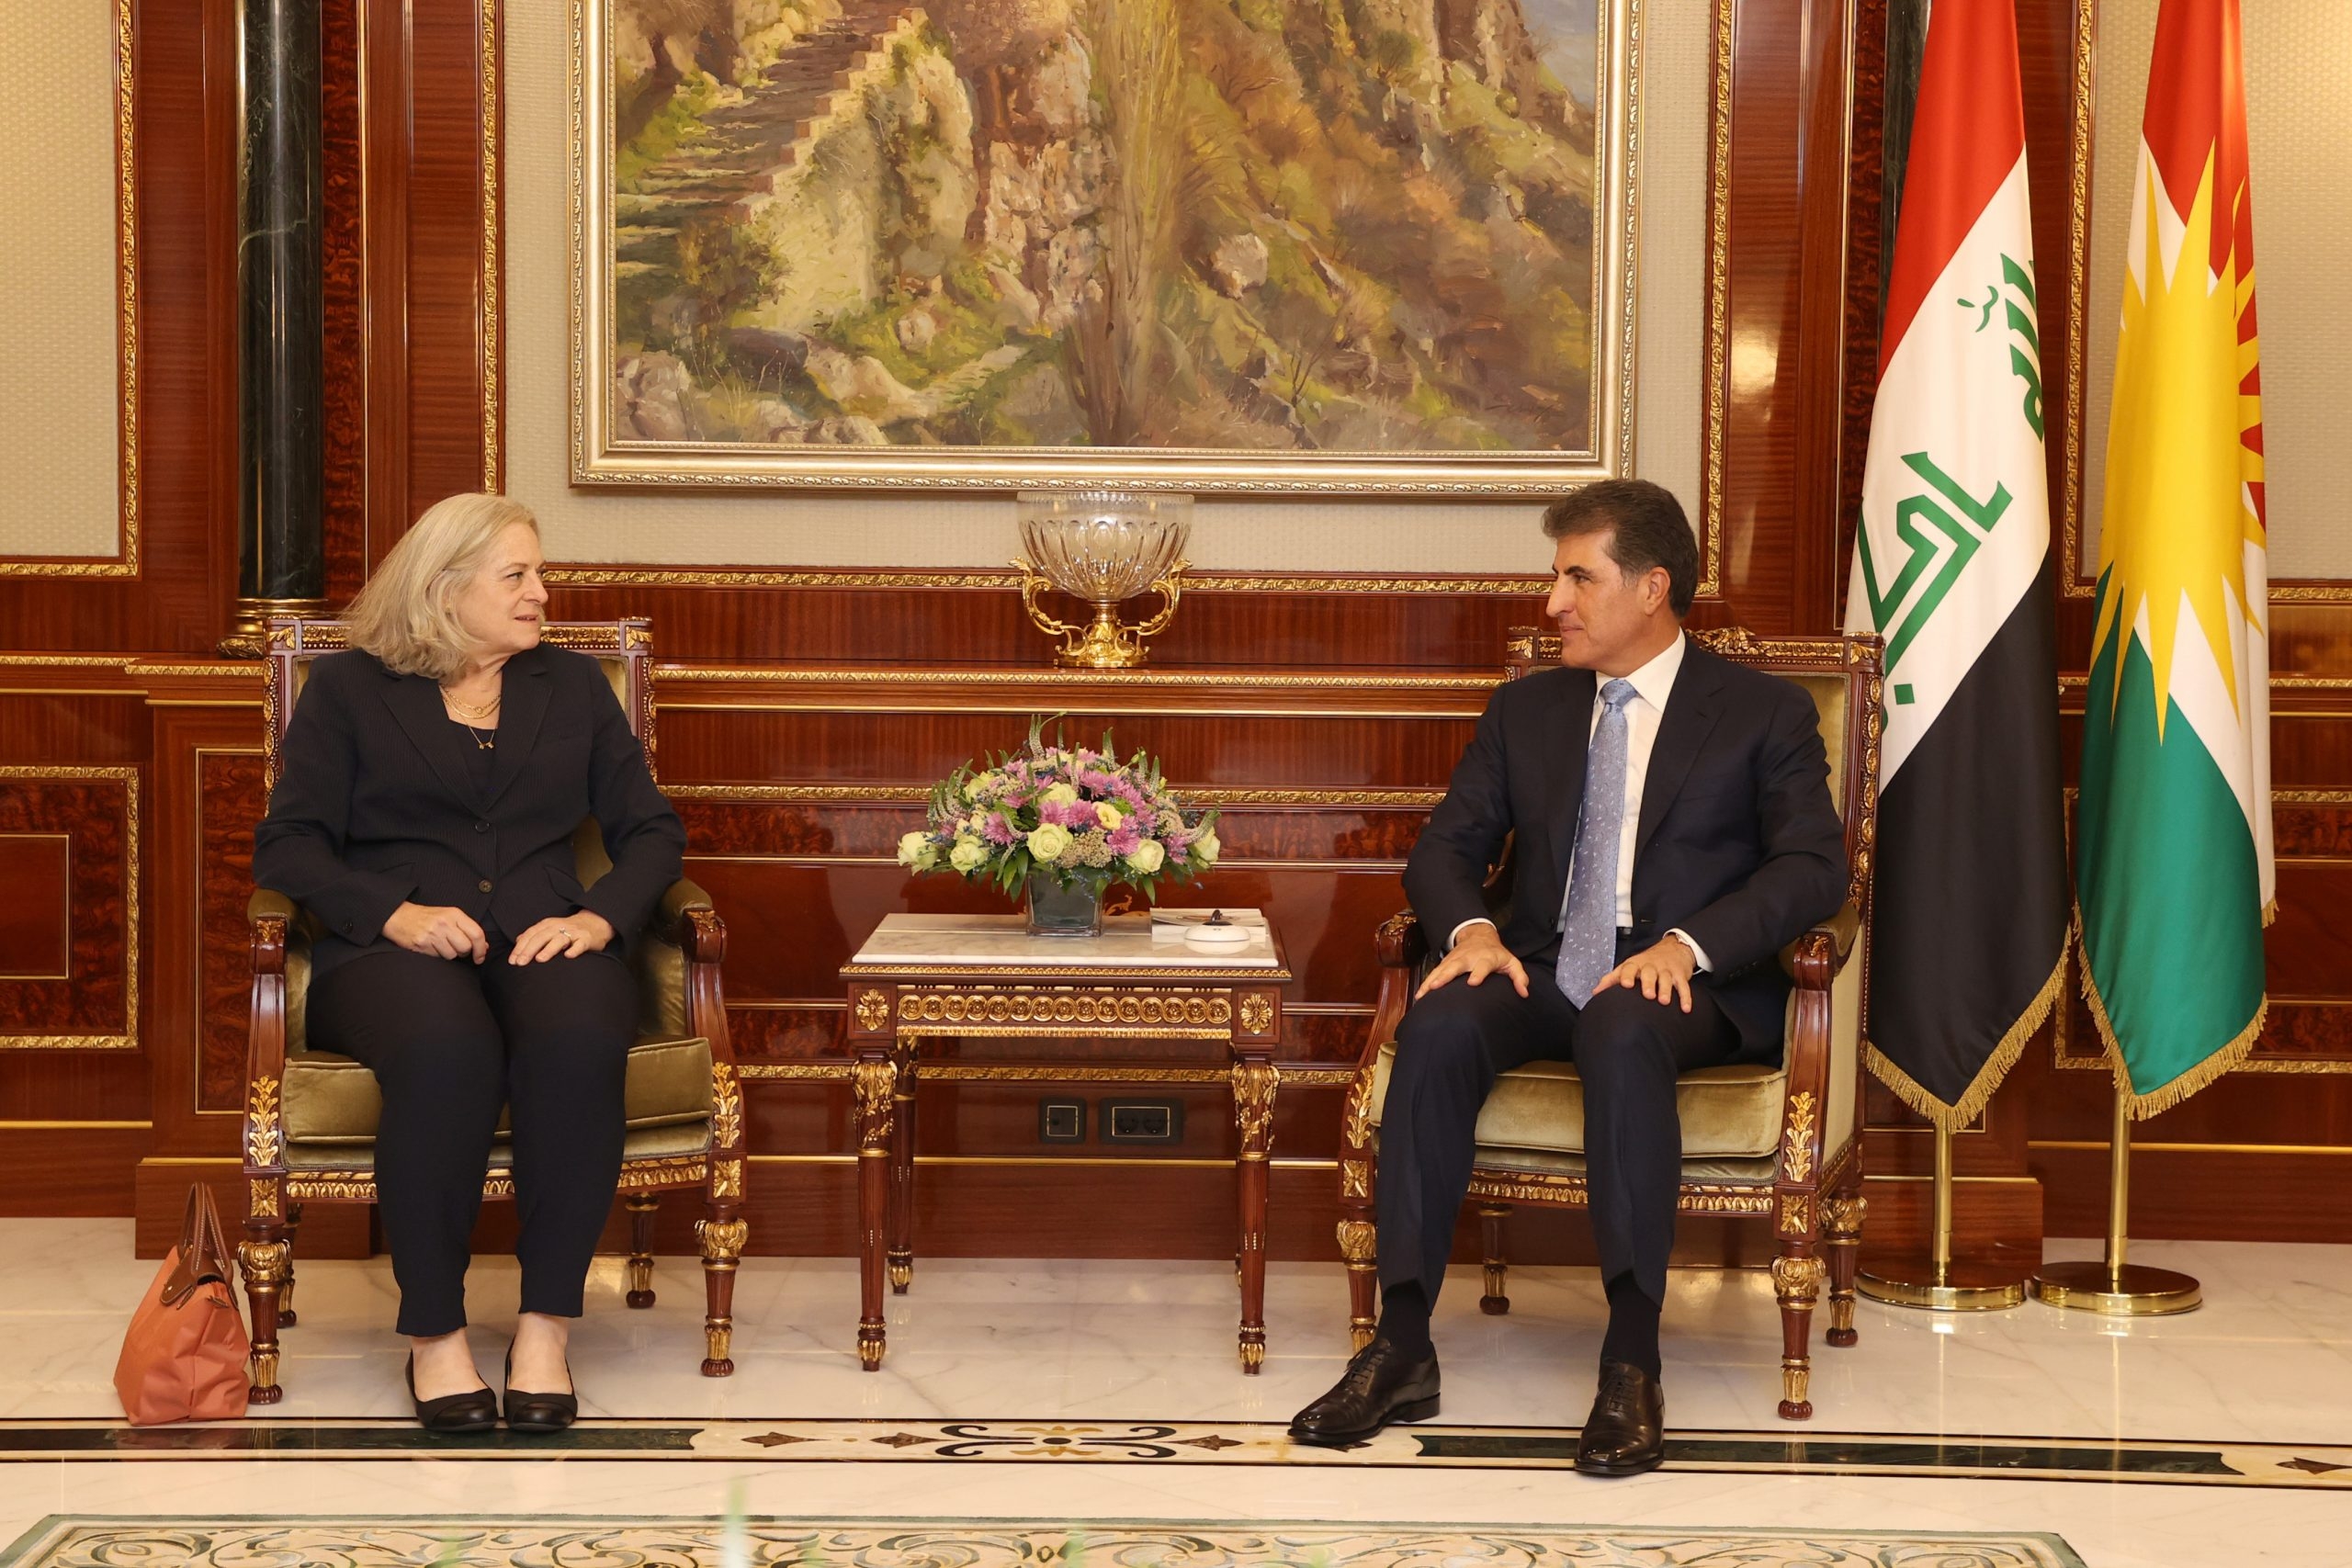 President Nechirvan Barzani and US Ambassador Discuss Critical Issues for Iraq and Kurdistan Region in High-Level Meeting